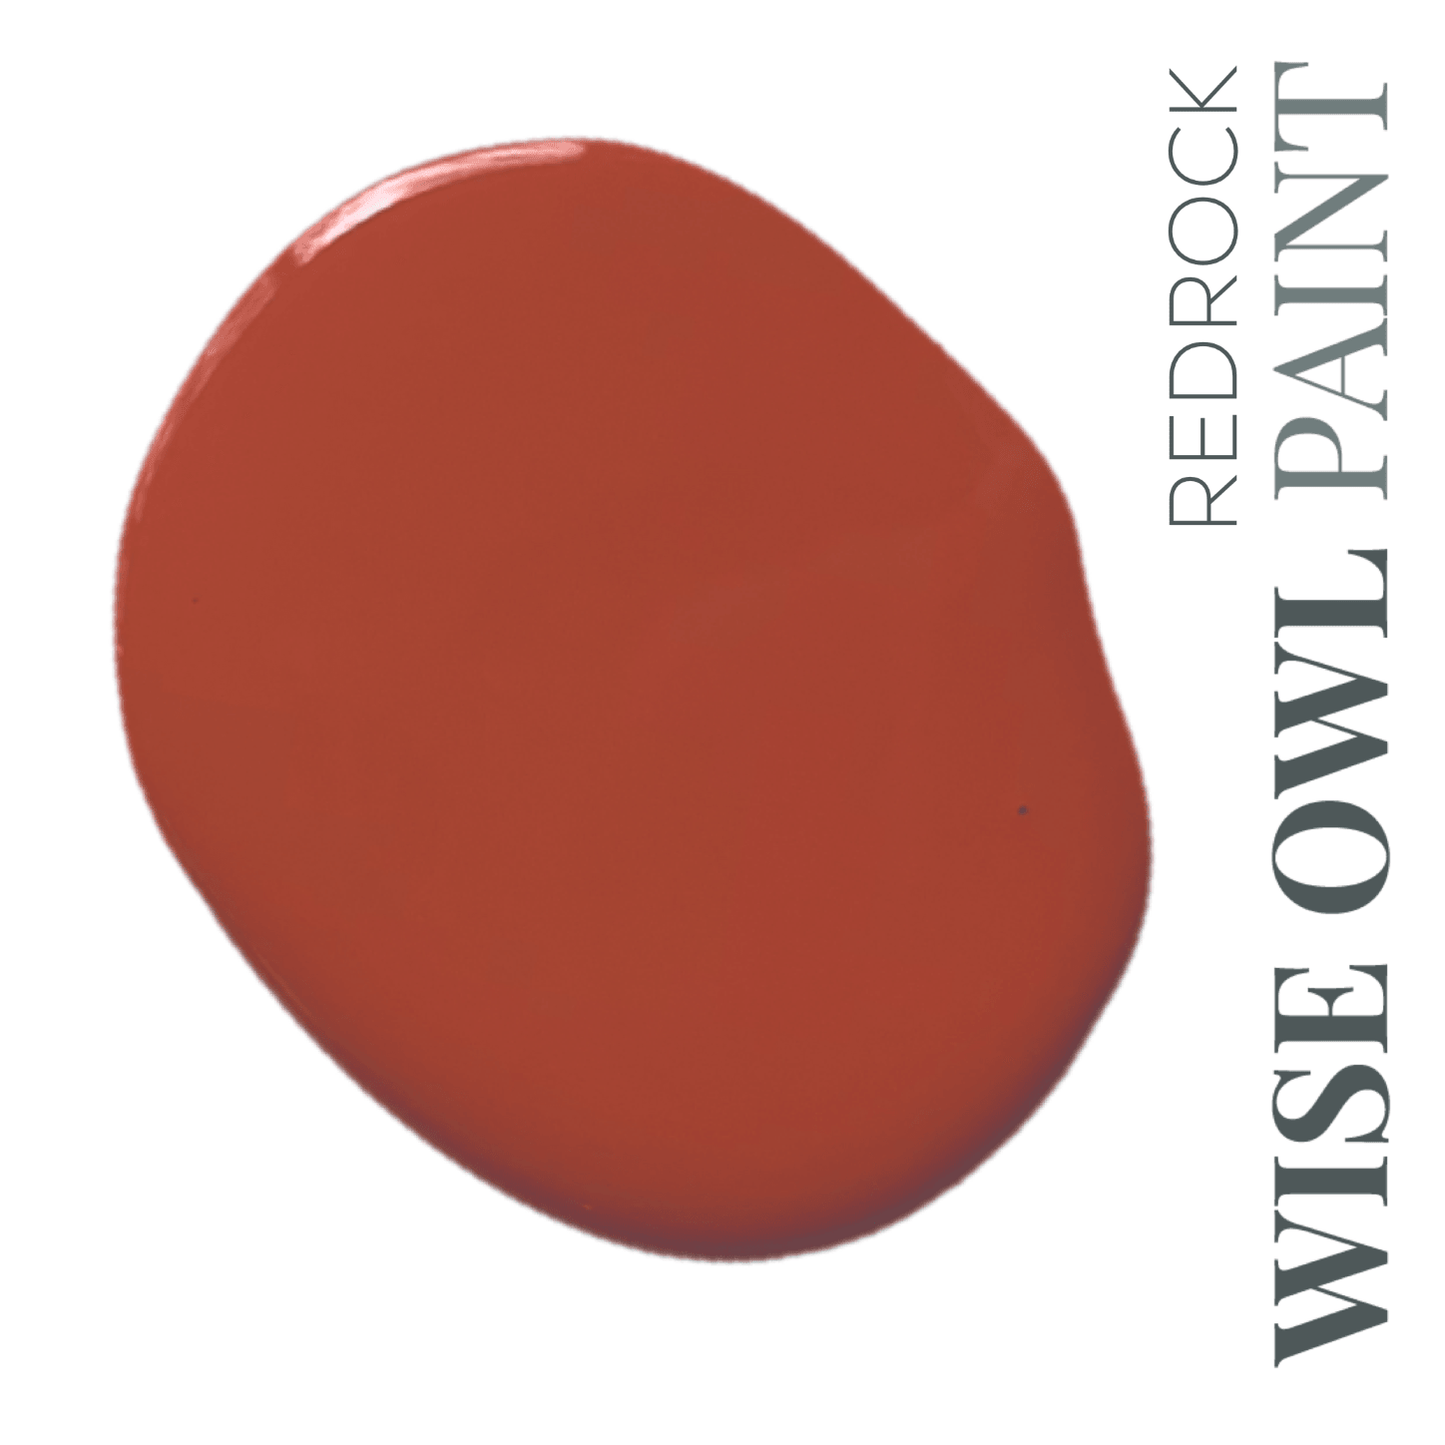 Wise Owl Chalk Synthesis Paint (Pint/16oz.) - The 3 Painted Pugs